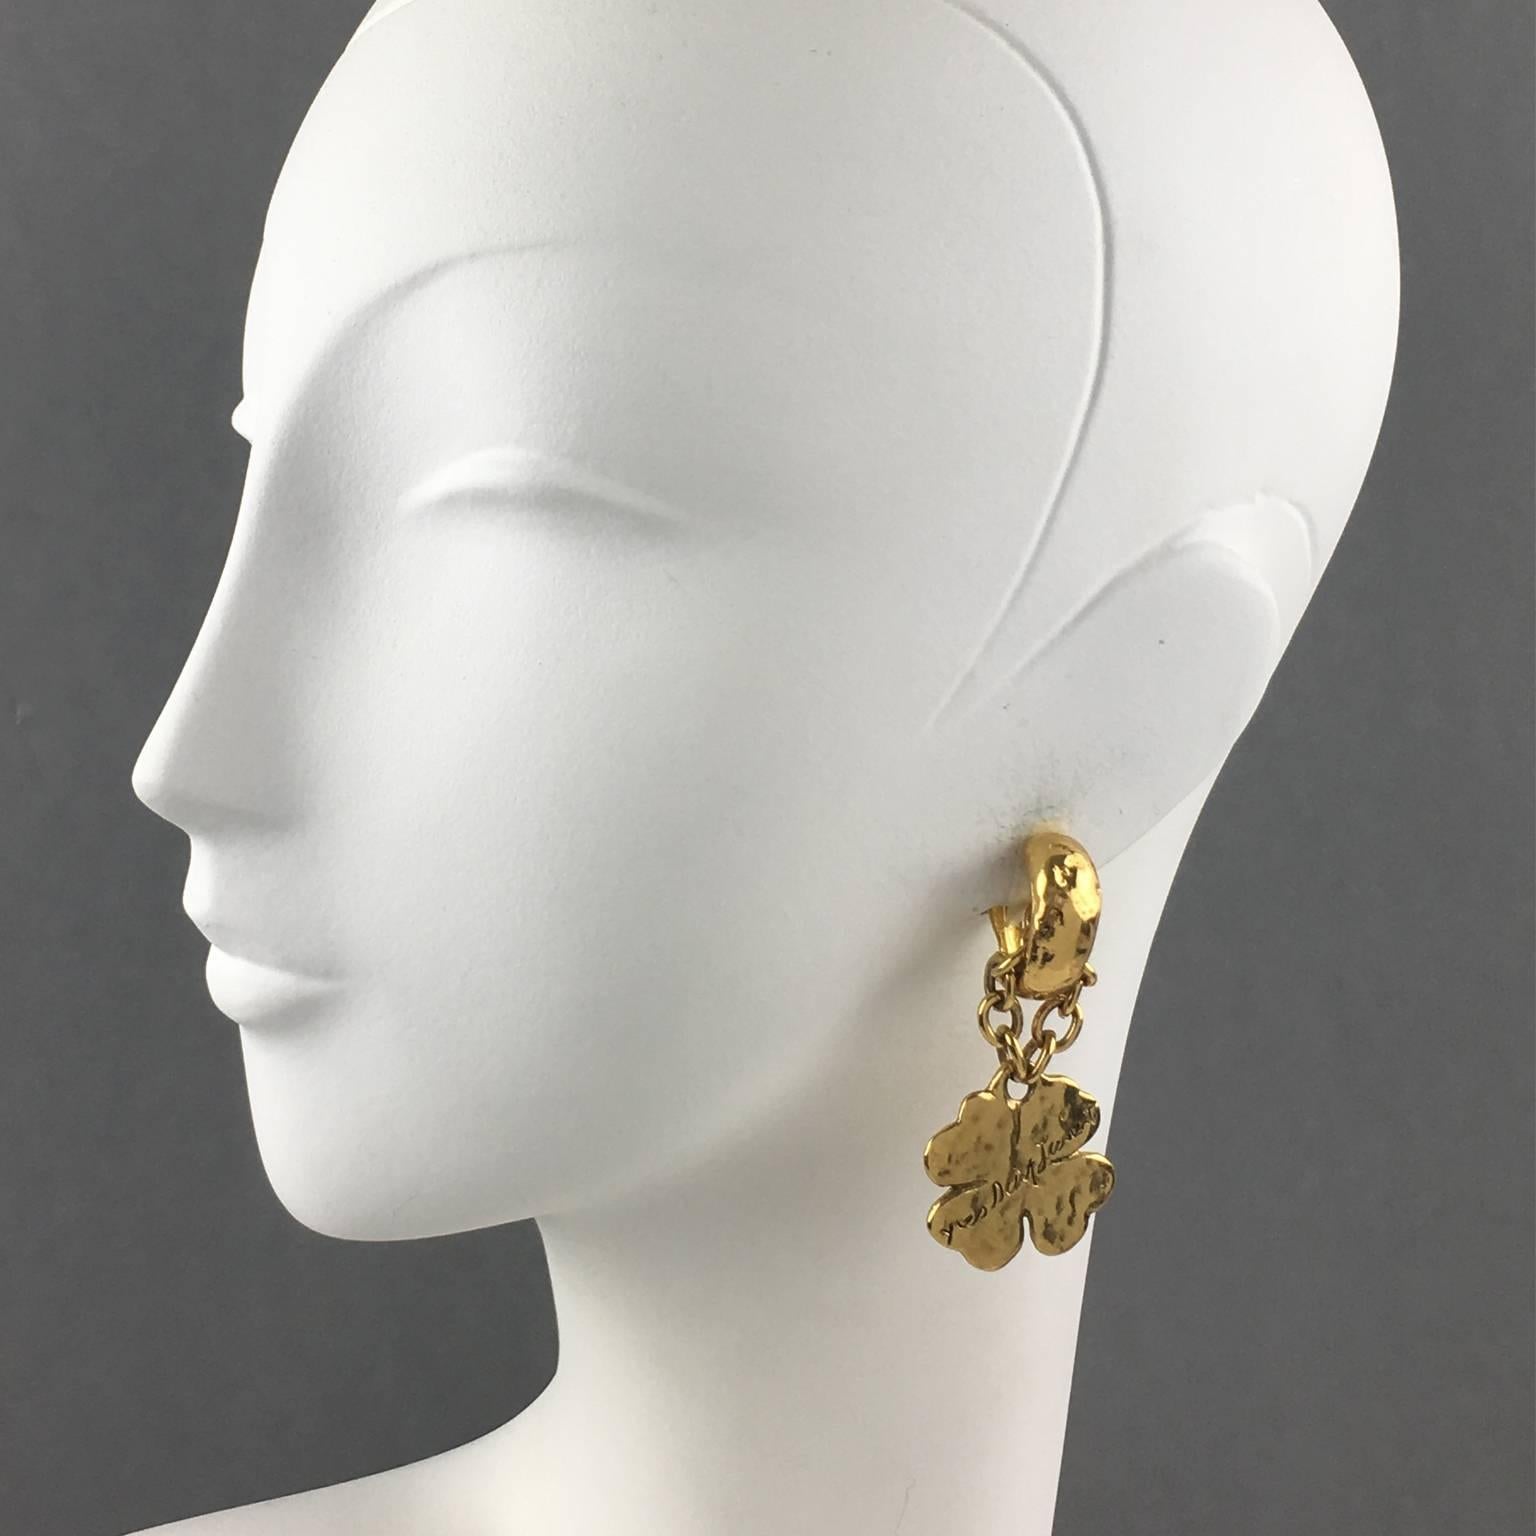 Fabulous Yves Saint Laurent Paris signed clip on earrings. Gilt metal with hand-made feel textured pattern compliment with dangling charm medallion featuring a huge four clover topped with engraved Yves Saint Laurent signature. YSL signature logo